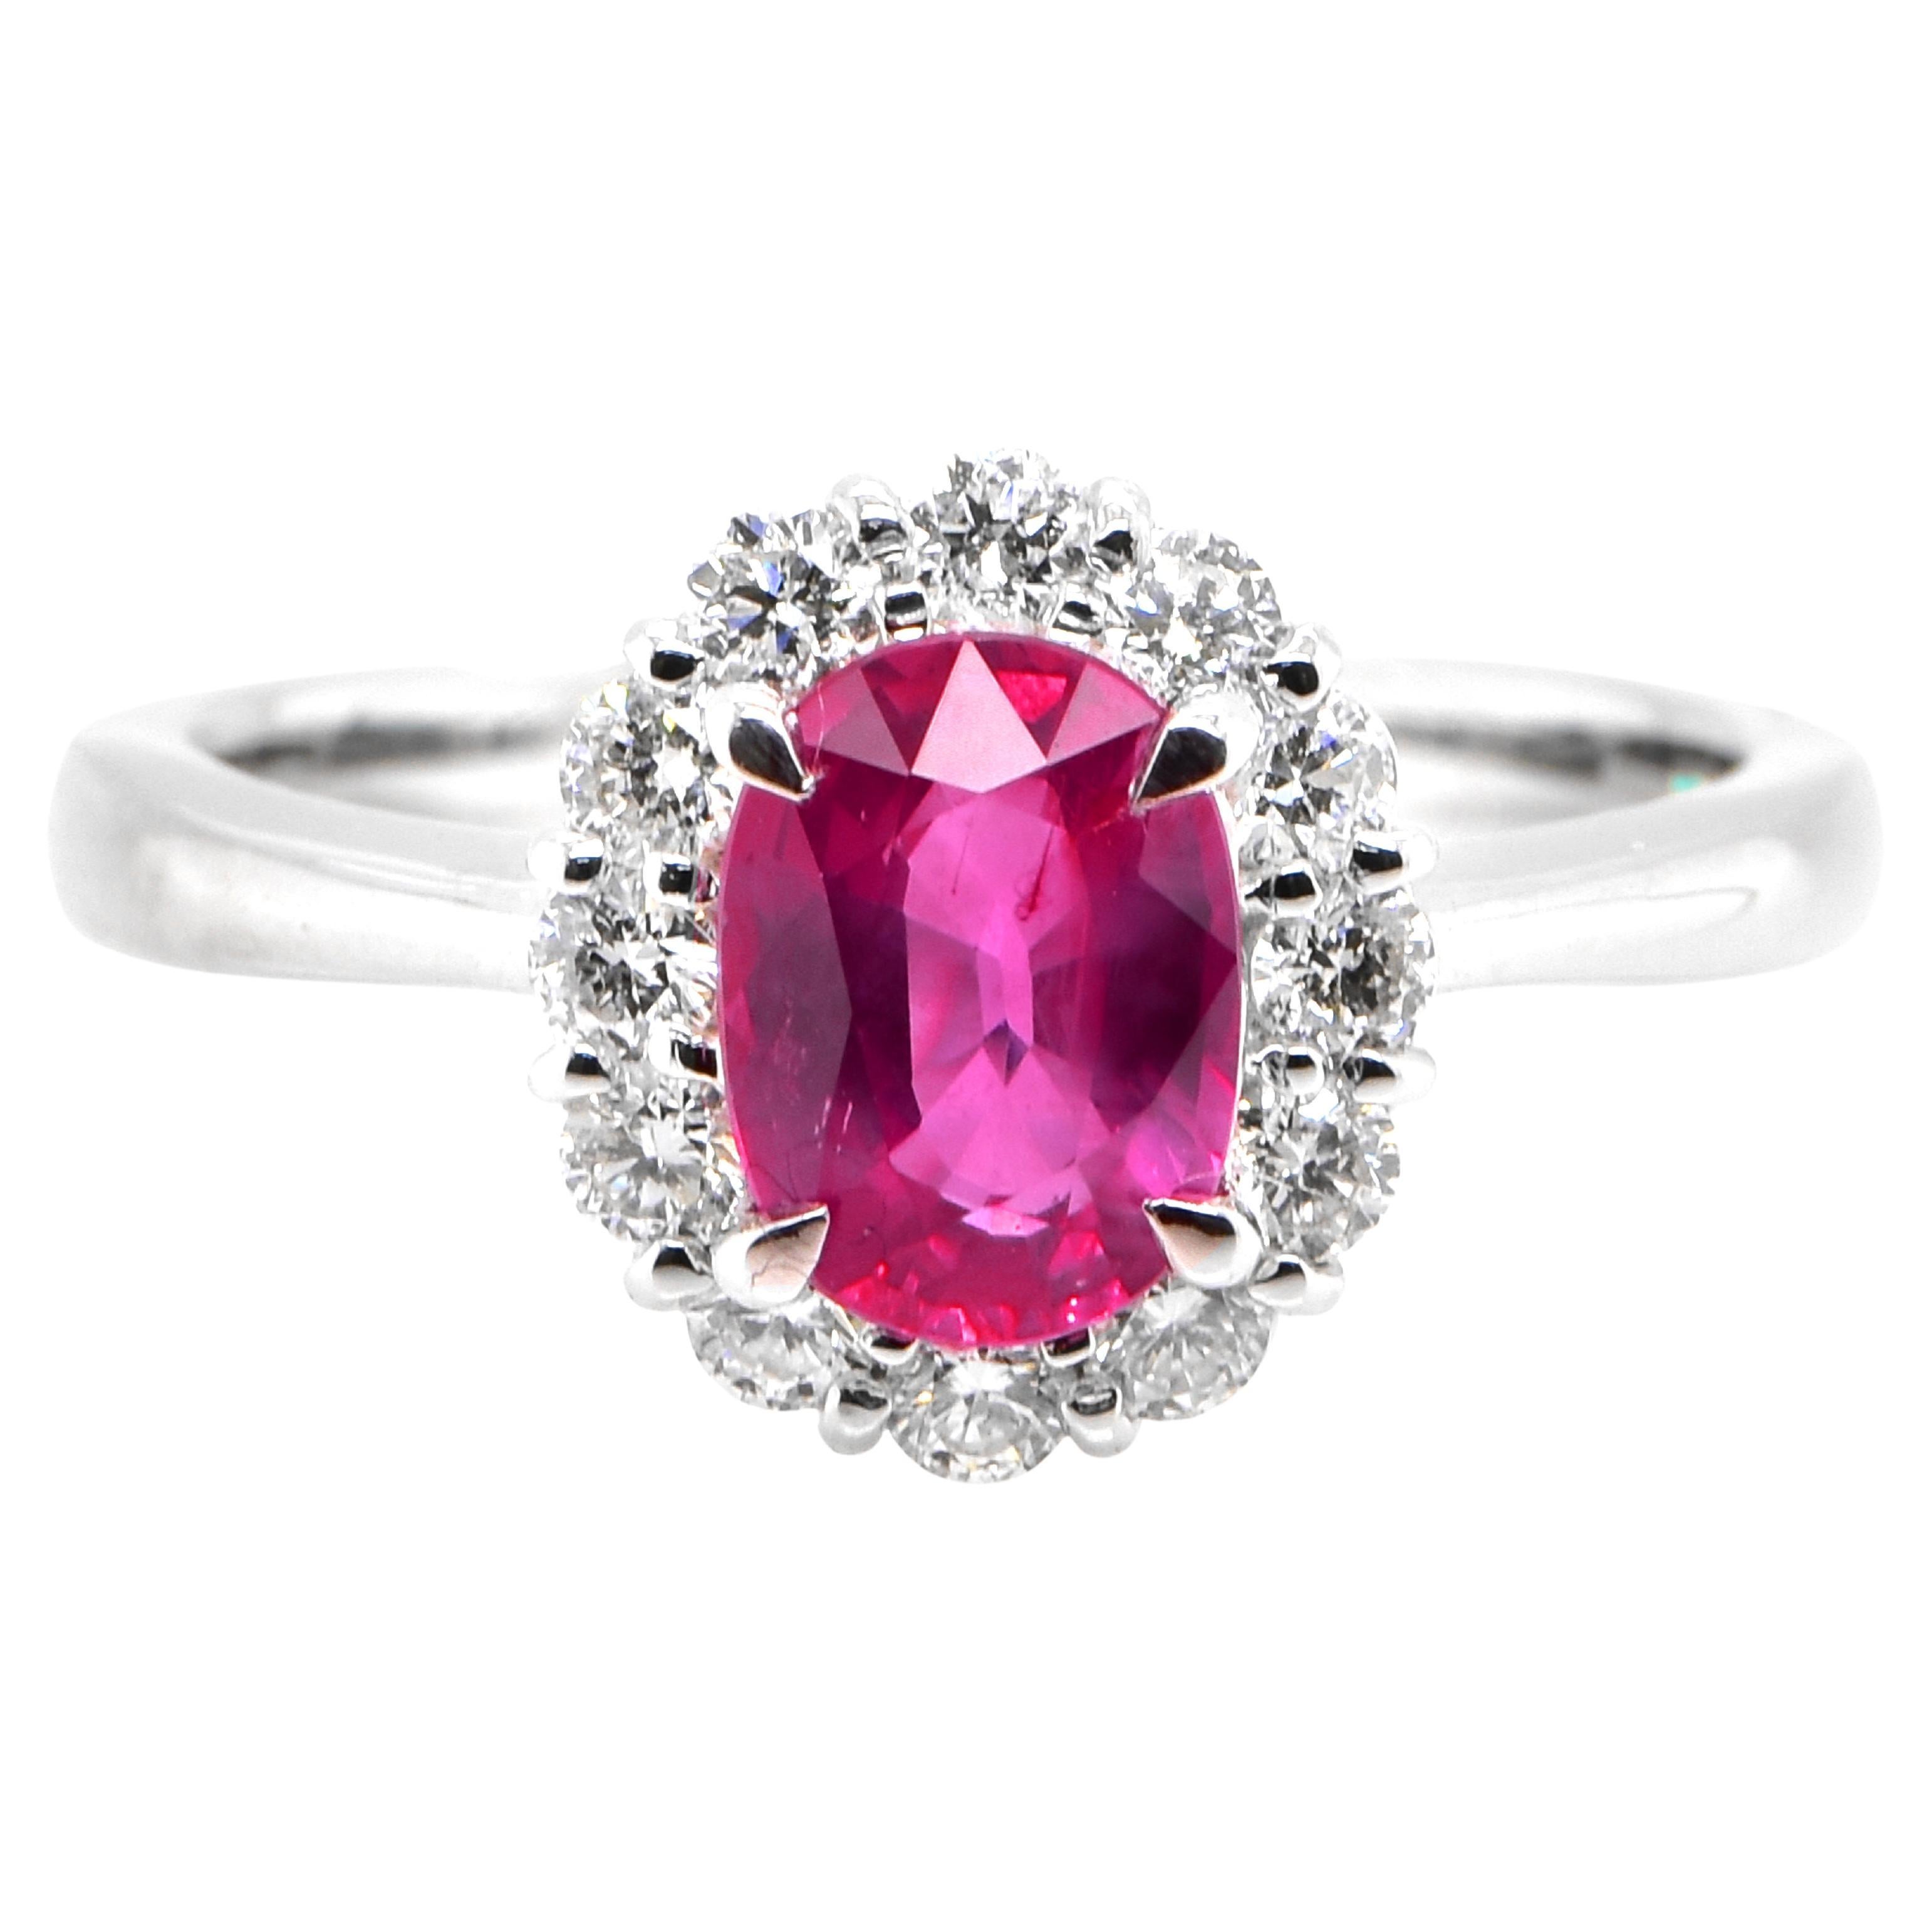 AIGS Certified 1.17 Carat Untreated Ruby and Diamond Ring Made in Platinum